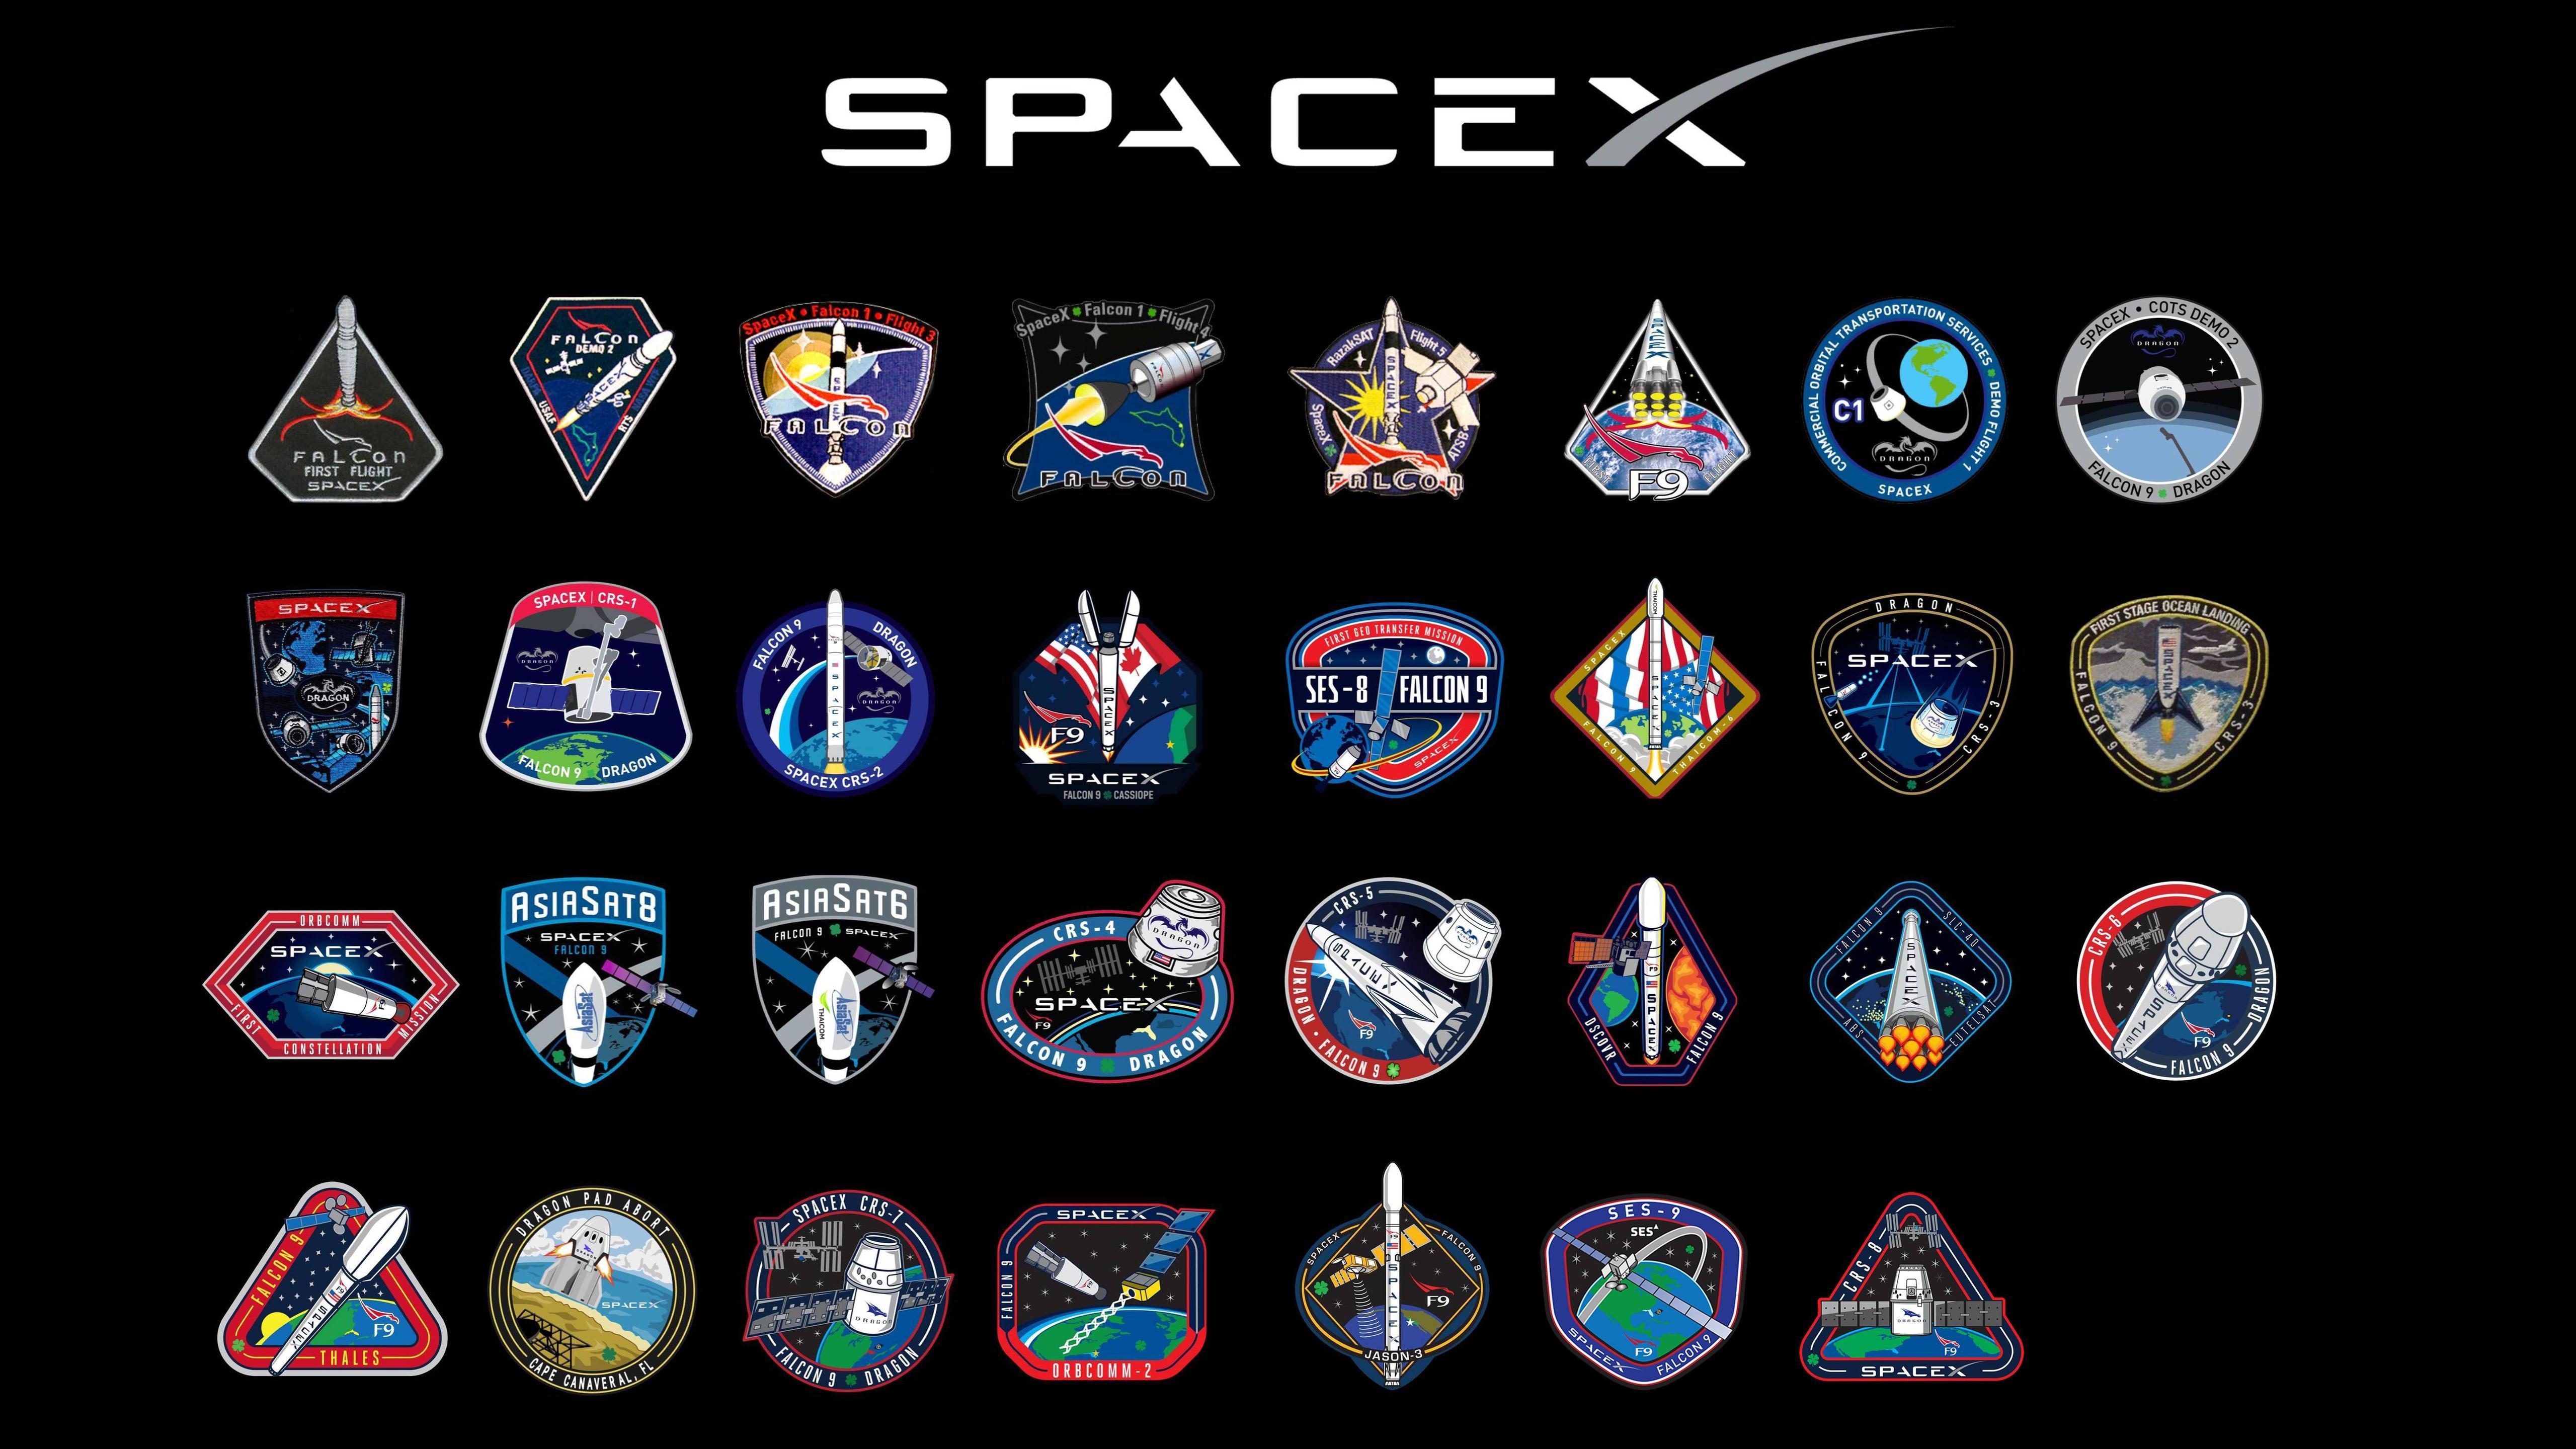 SpaceX Rocket Logo - SpaceX Mission Patch Wallpaper (16:9) : spacex